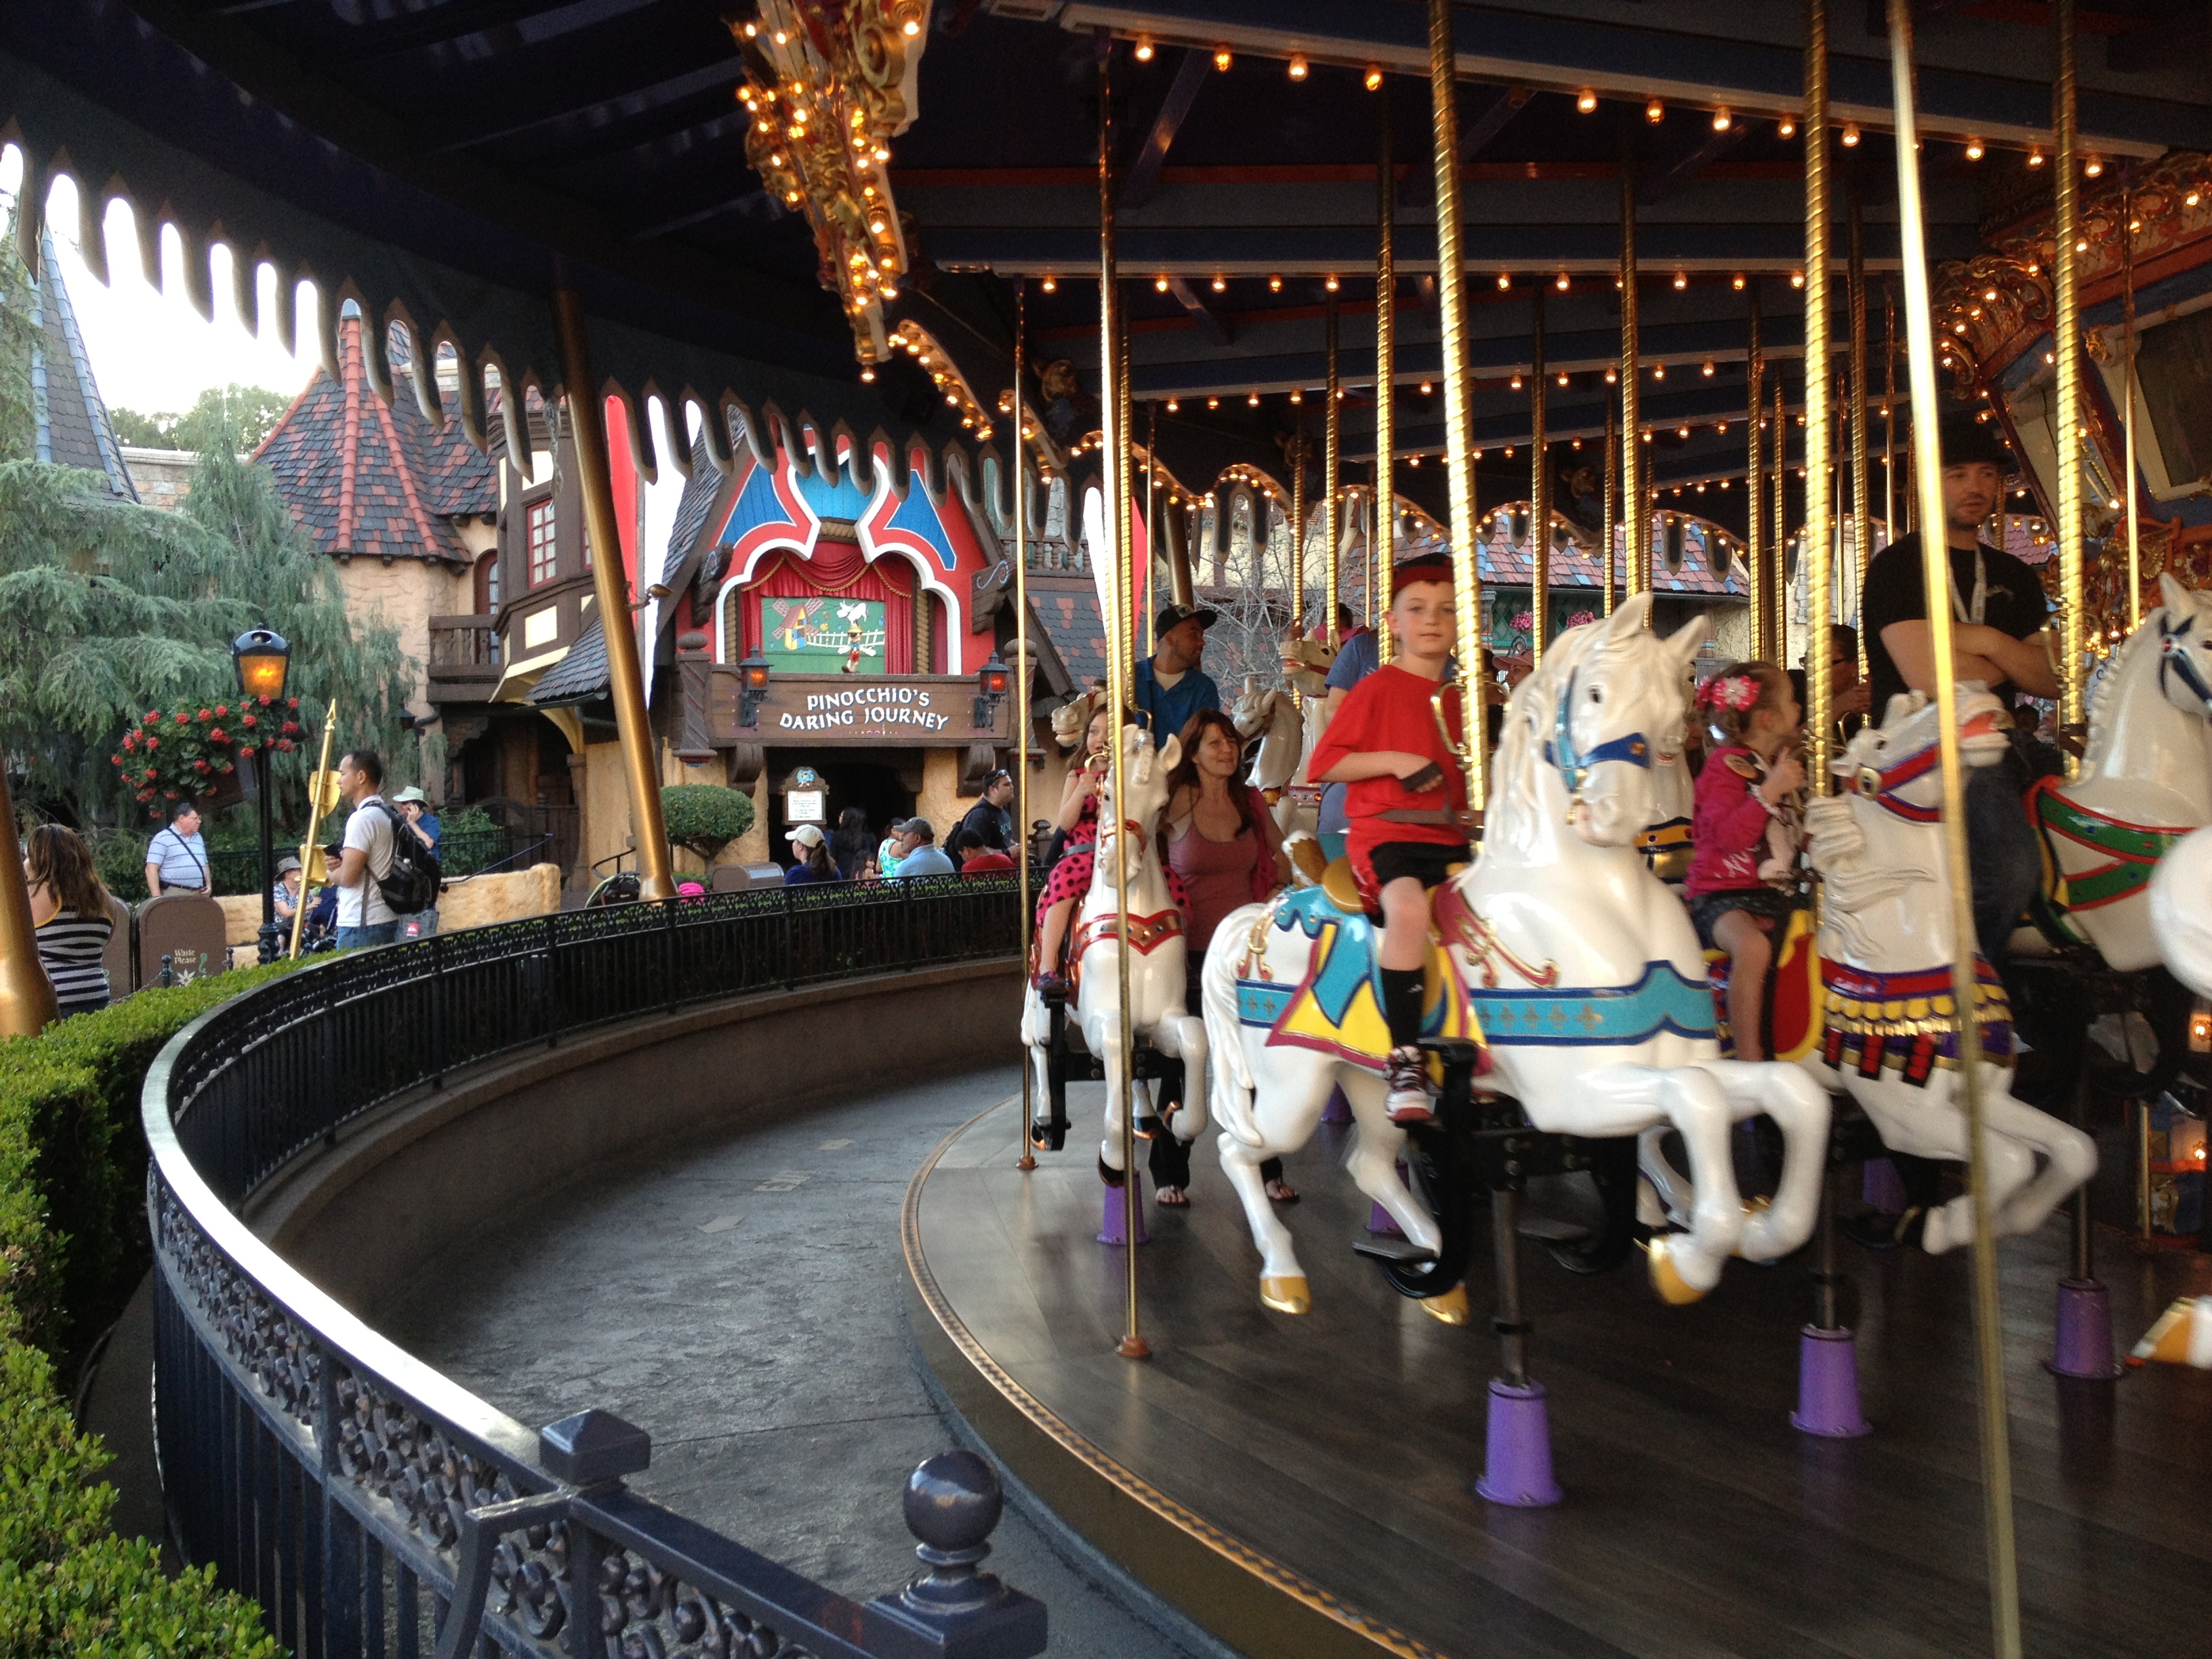 Maximize your Ride Time at Disneyland